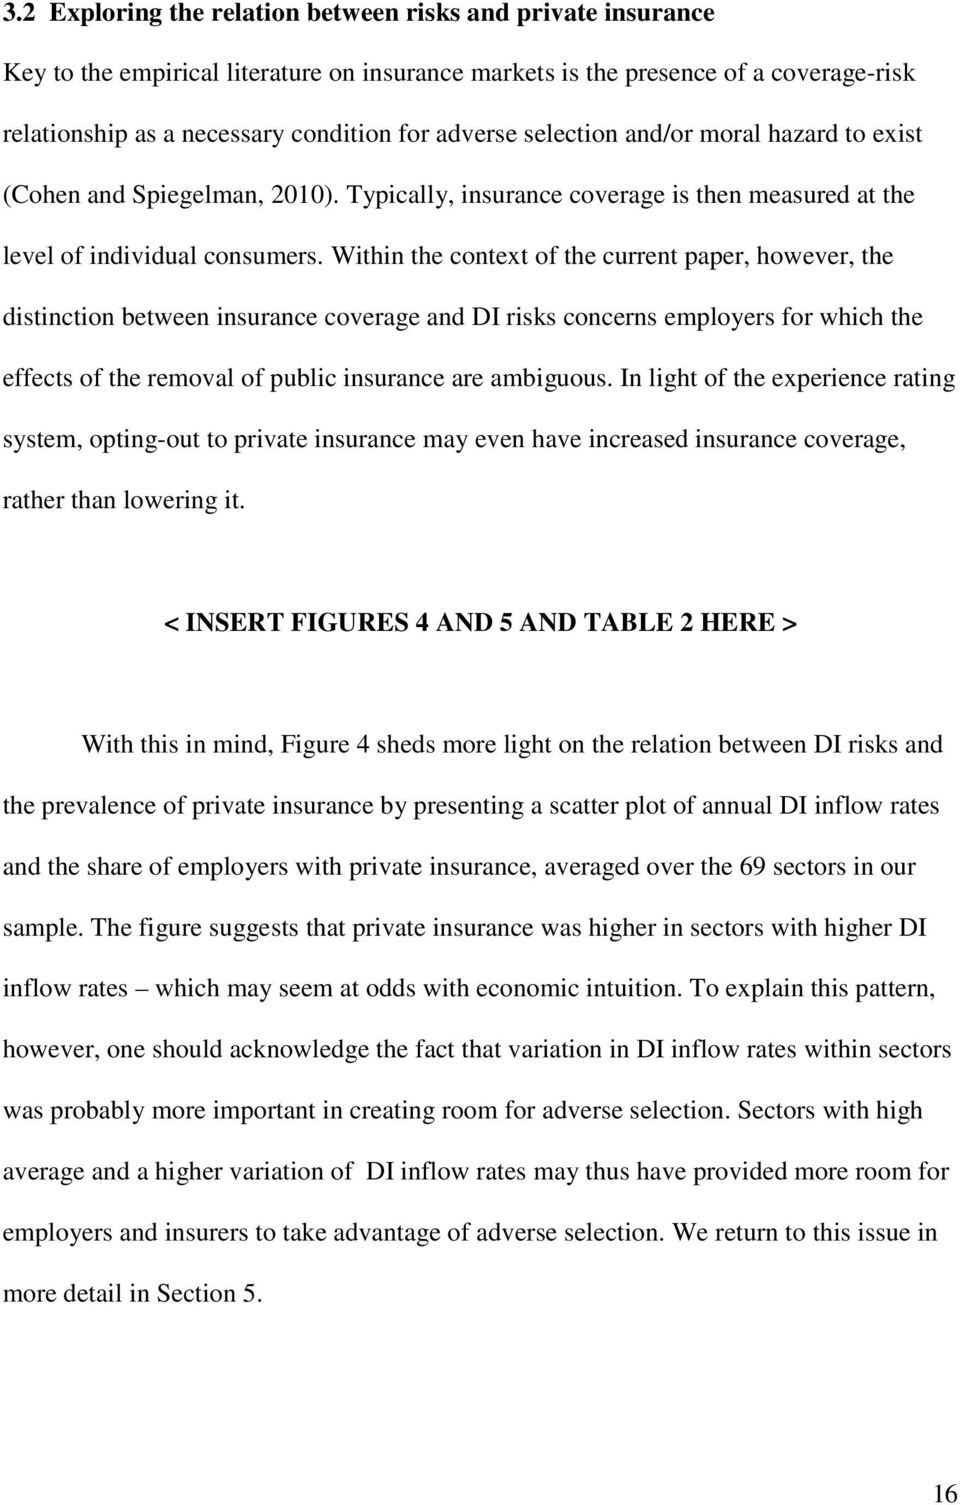 Within the context of the current paper, however, the distinction between insurance coverage and DI risks concerns employers for which the effects of the removal of public insurance are ambiguous.